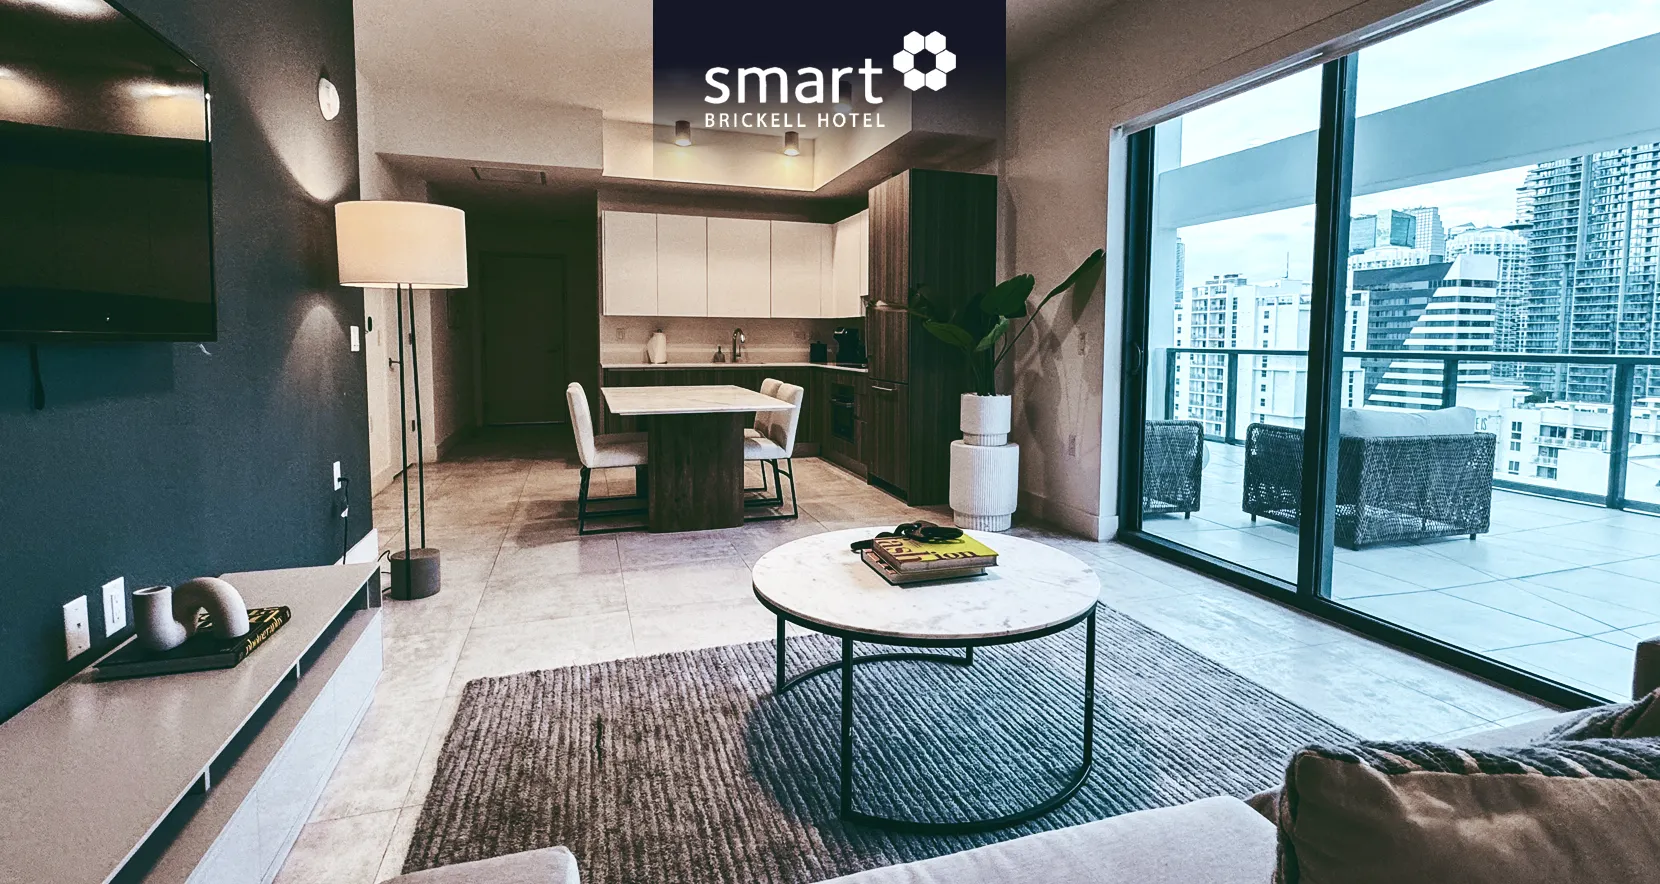 Discover the Benefits of Smart Brickell Hotel